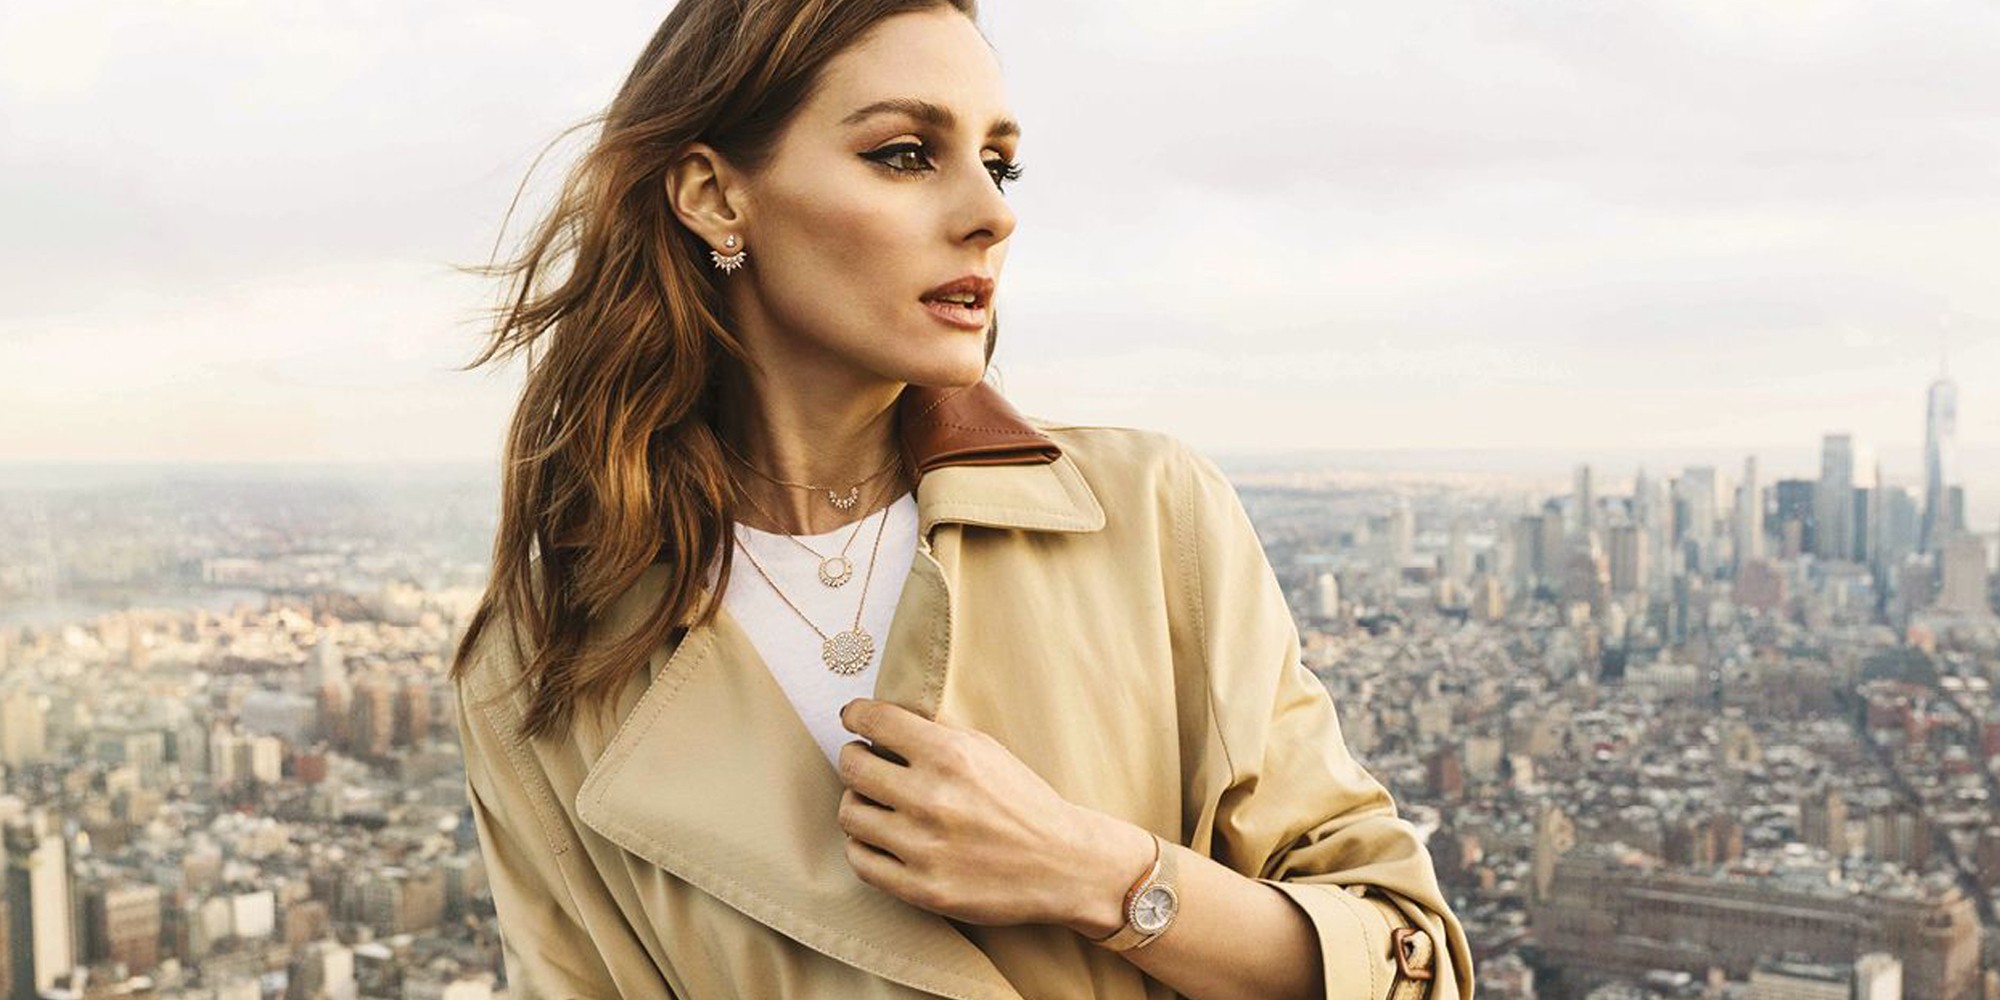 PIAGET X OLIVIA PALERMO SUNLIGHT COLLECTION FILM